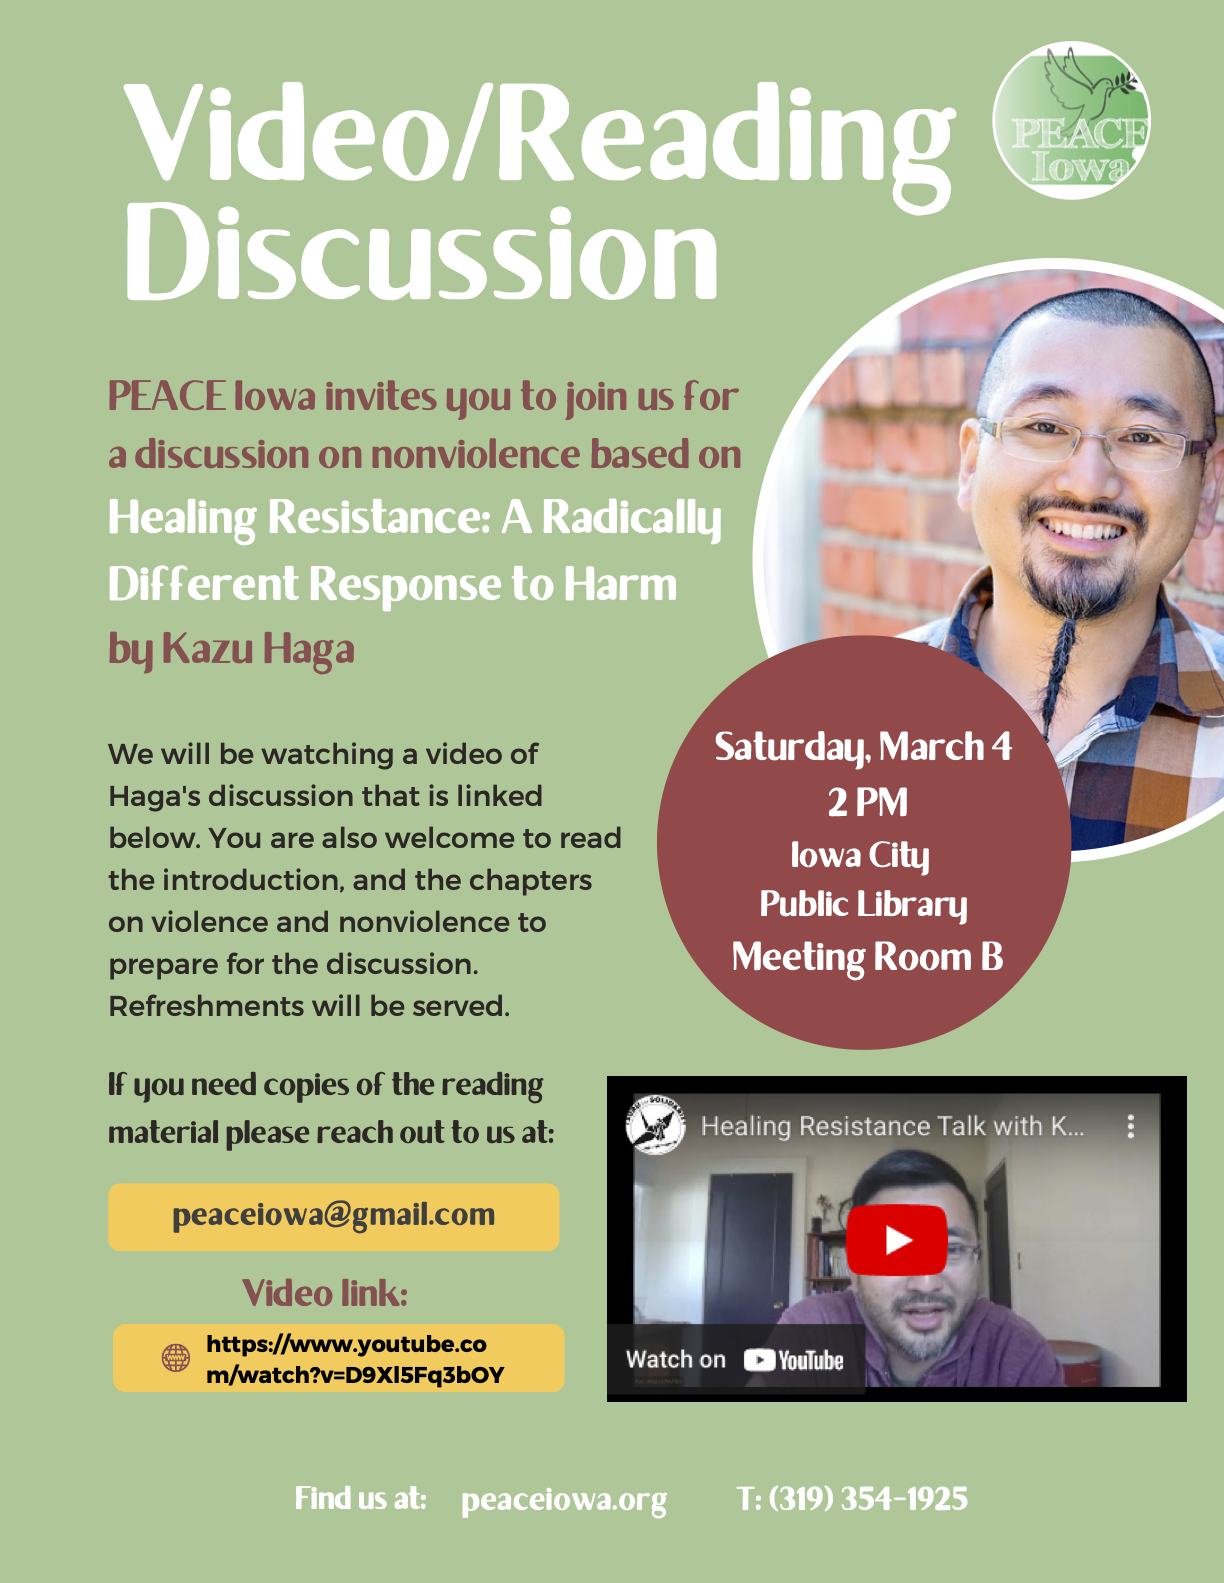 Video/Reading Discussion
PEACE Iowa invites you to join us for a discussion on nonviolence based on
Healing Resistance: A Radically Different Response to Harm
by Kazu Haga
Saturday, March 4 2PM
Iowa City Public Library Meeting Room B
We will be watching a video of Haga's discussion that is linked below. You are also welcome to read the introduction, and the chapters on violence and nonviolence to prepare for the discussion. Refreshments will be served.
If you need copies of the reading material please reach out to us at:
peaceiowa@gmail.com